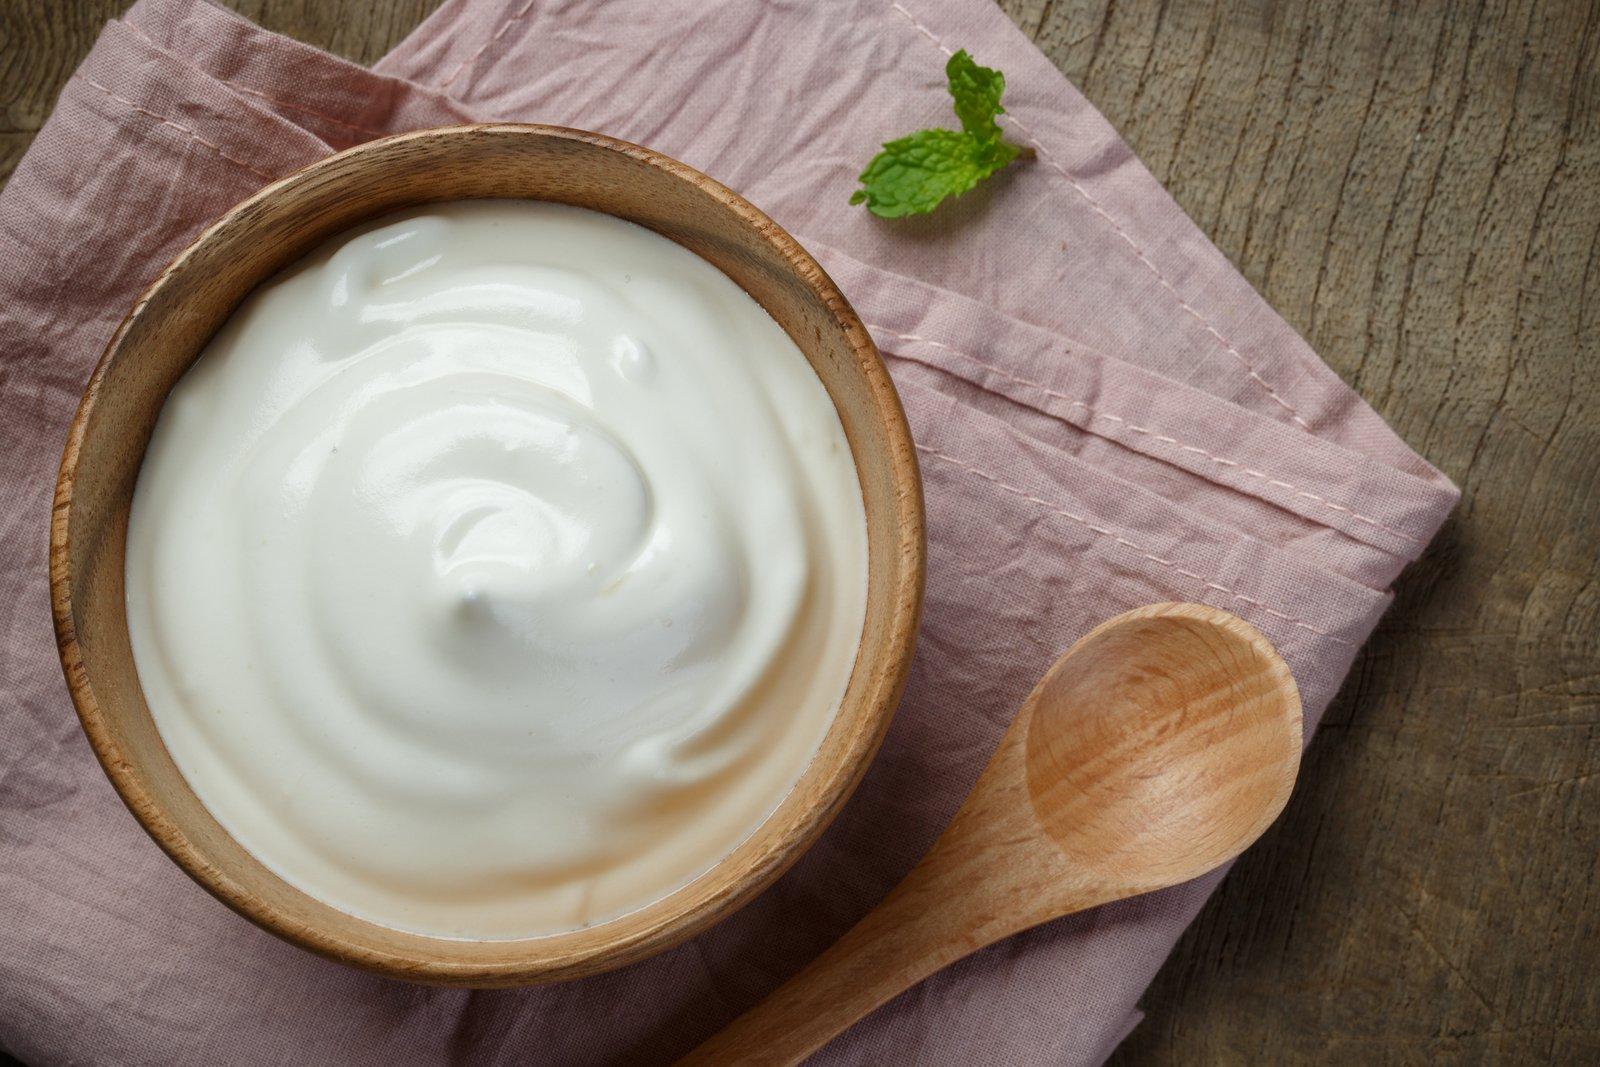 Curd Benefits: Along with keeping digestion healthy, curd is also very beneficial in these problems, know its benefits